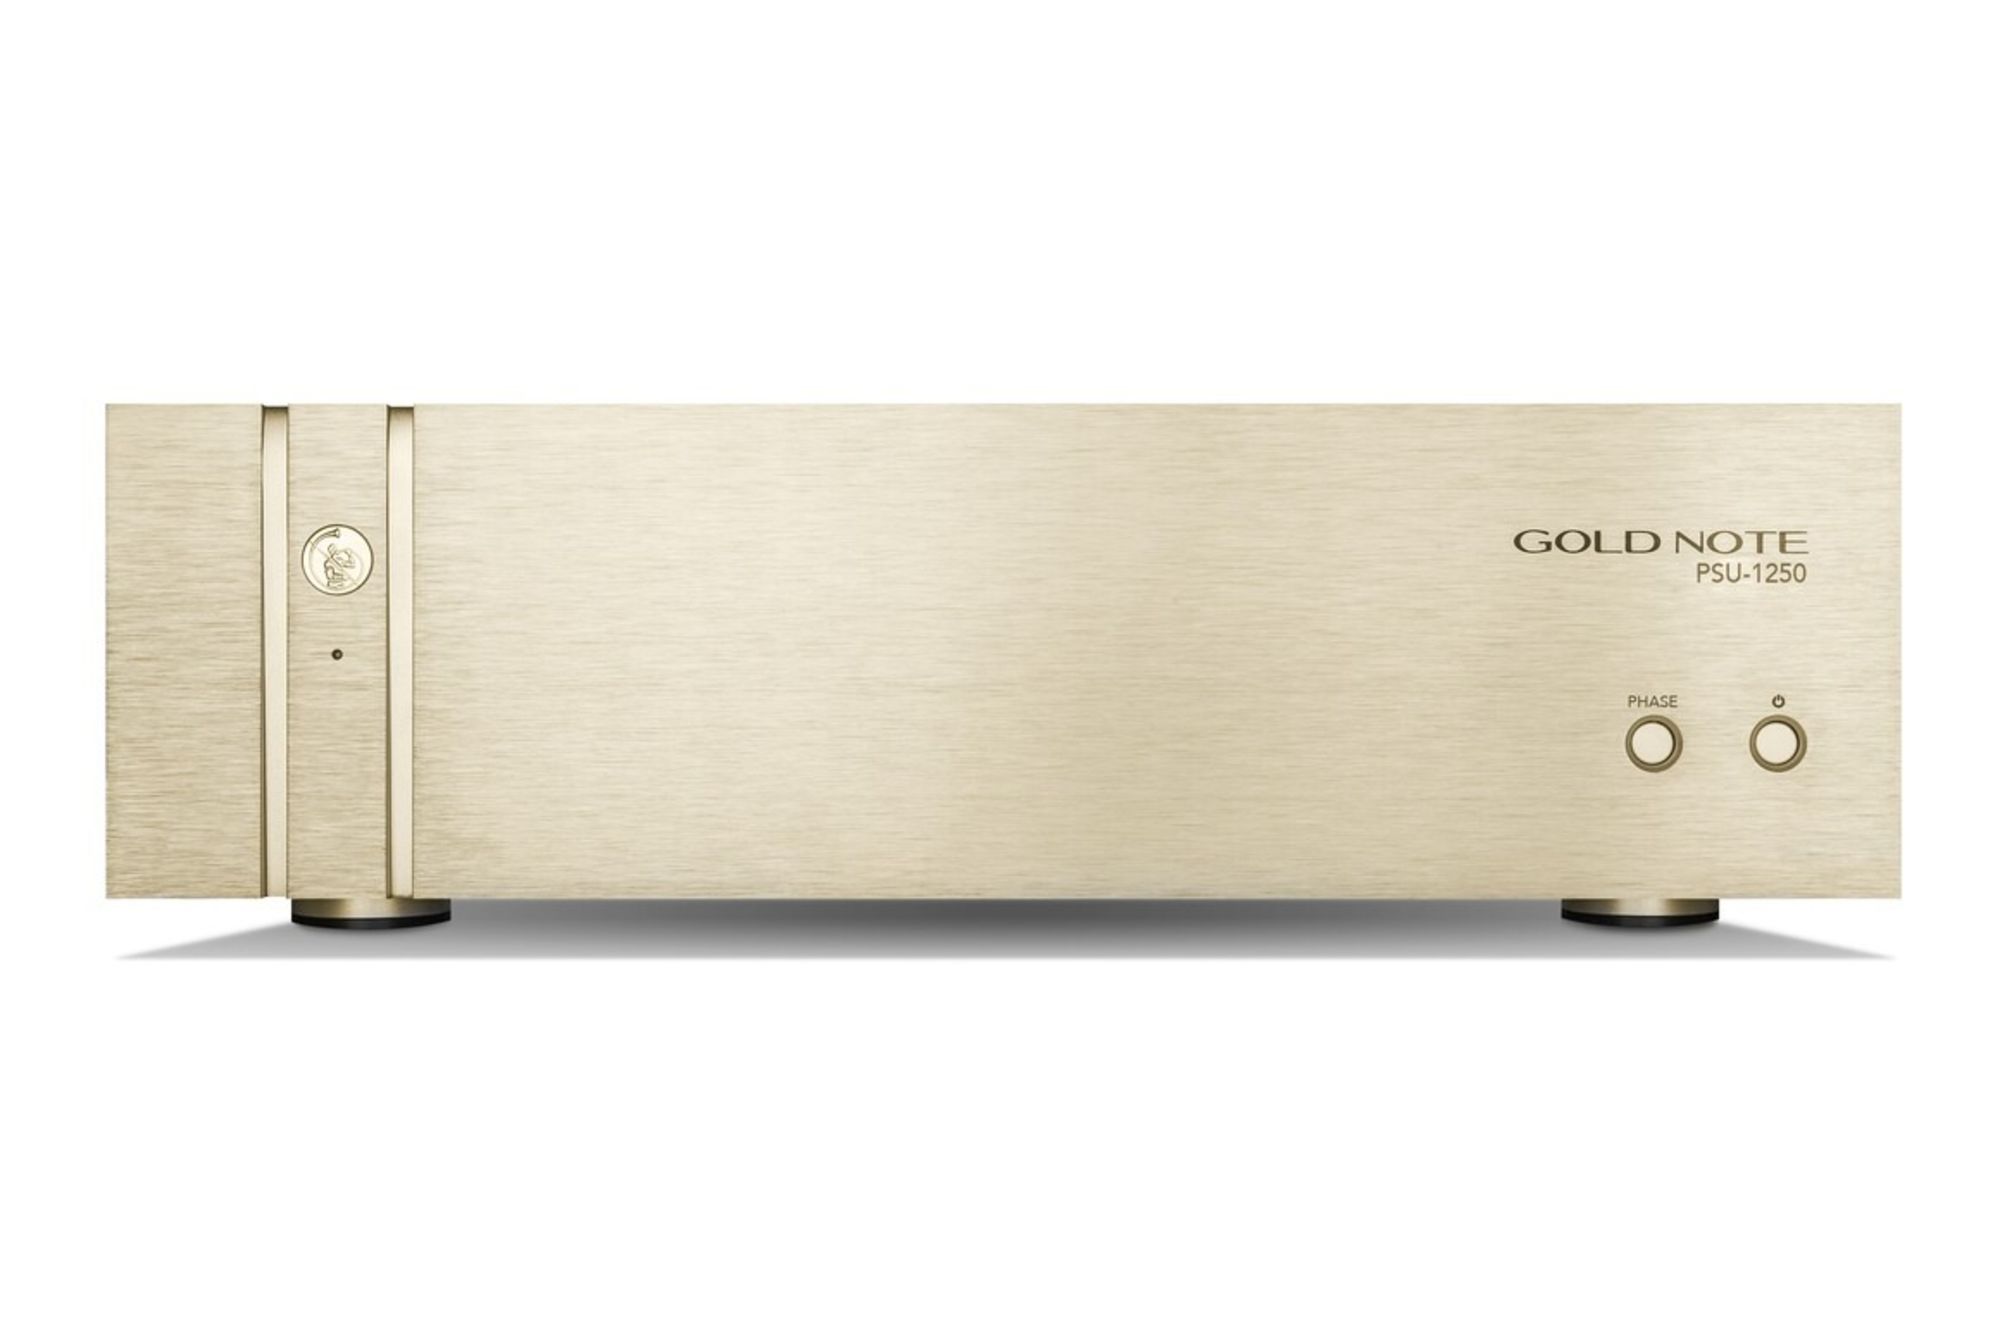 Блоки питания Gold Note PSU-1000 gold cd проигрыватели gold note cd 1000 deluxe mkii silver